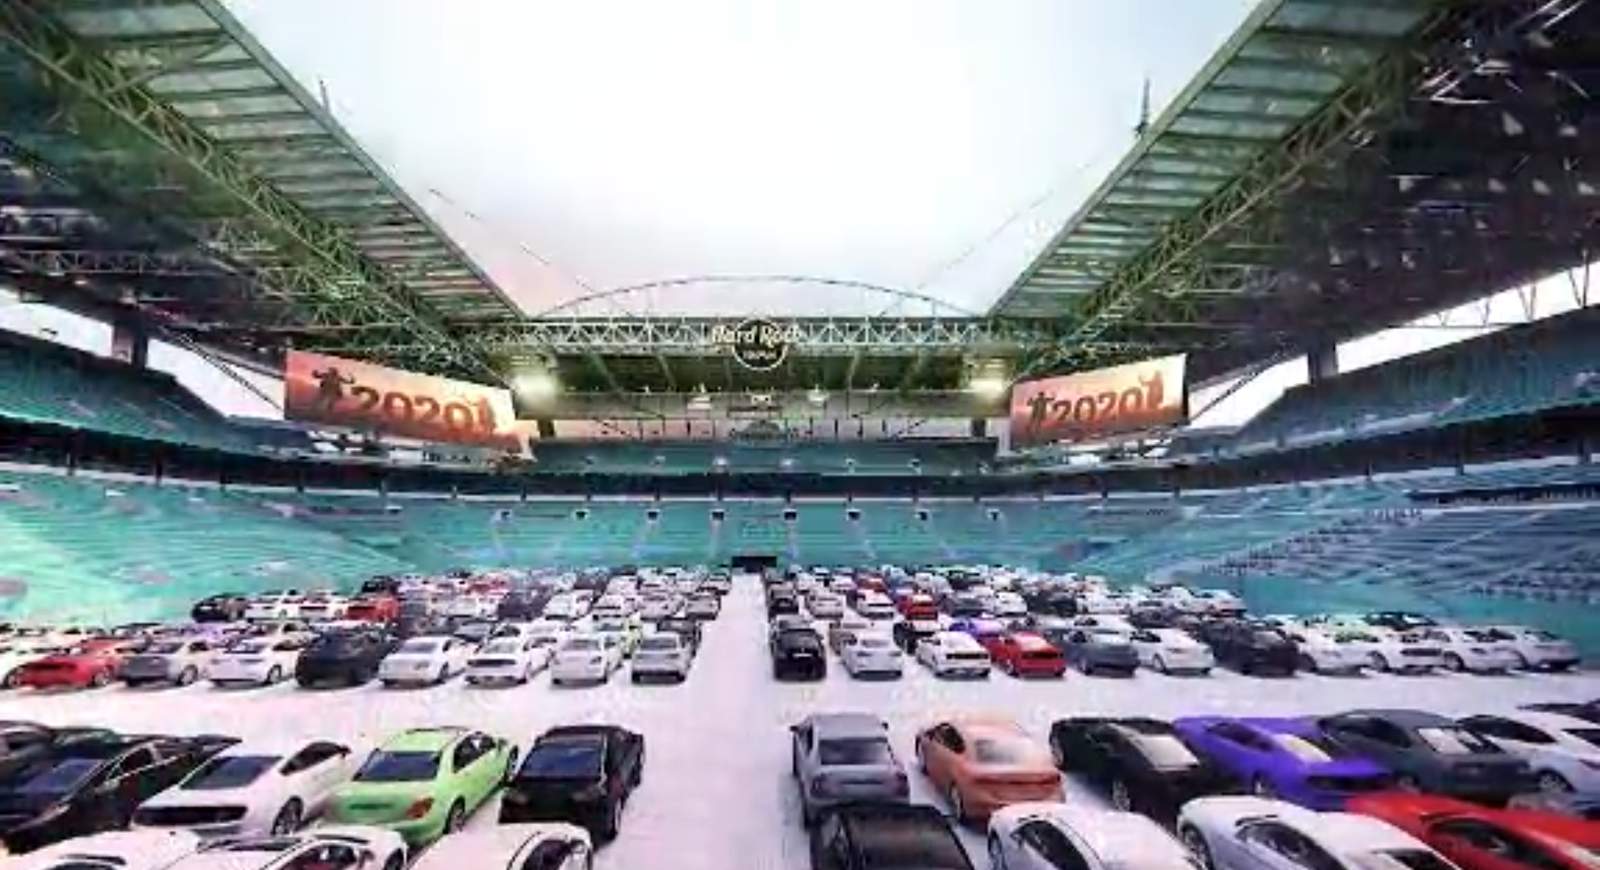 Florida NFL team to hold drive-in movies inside stadium